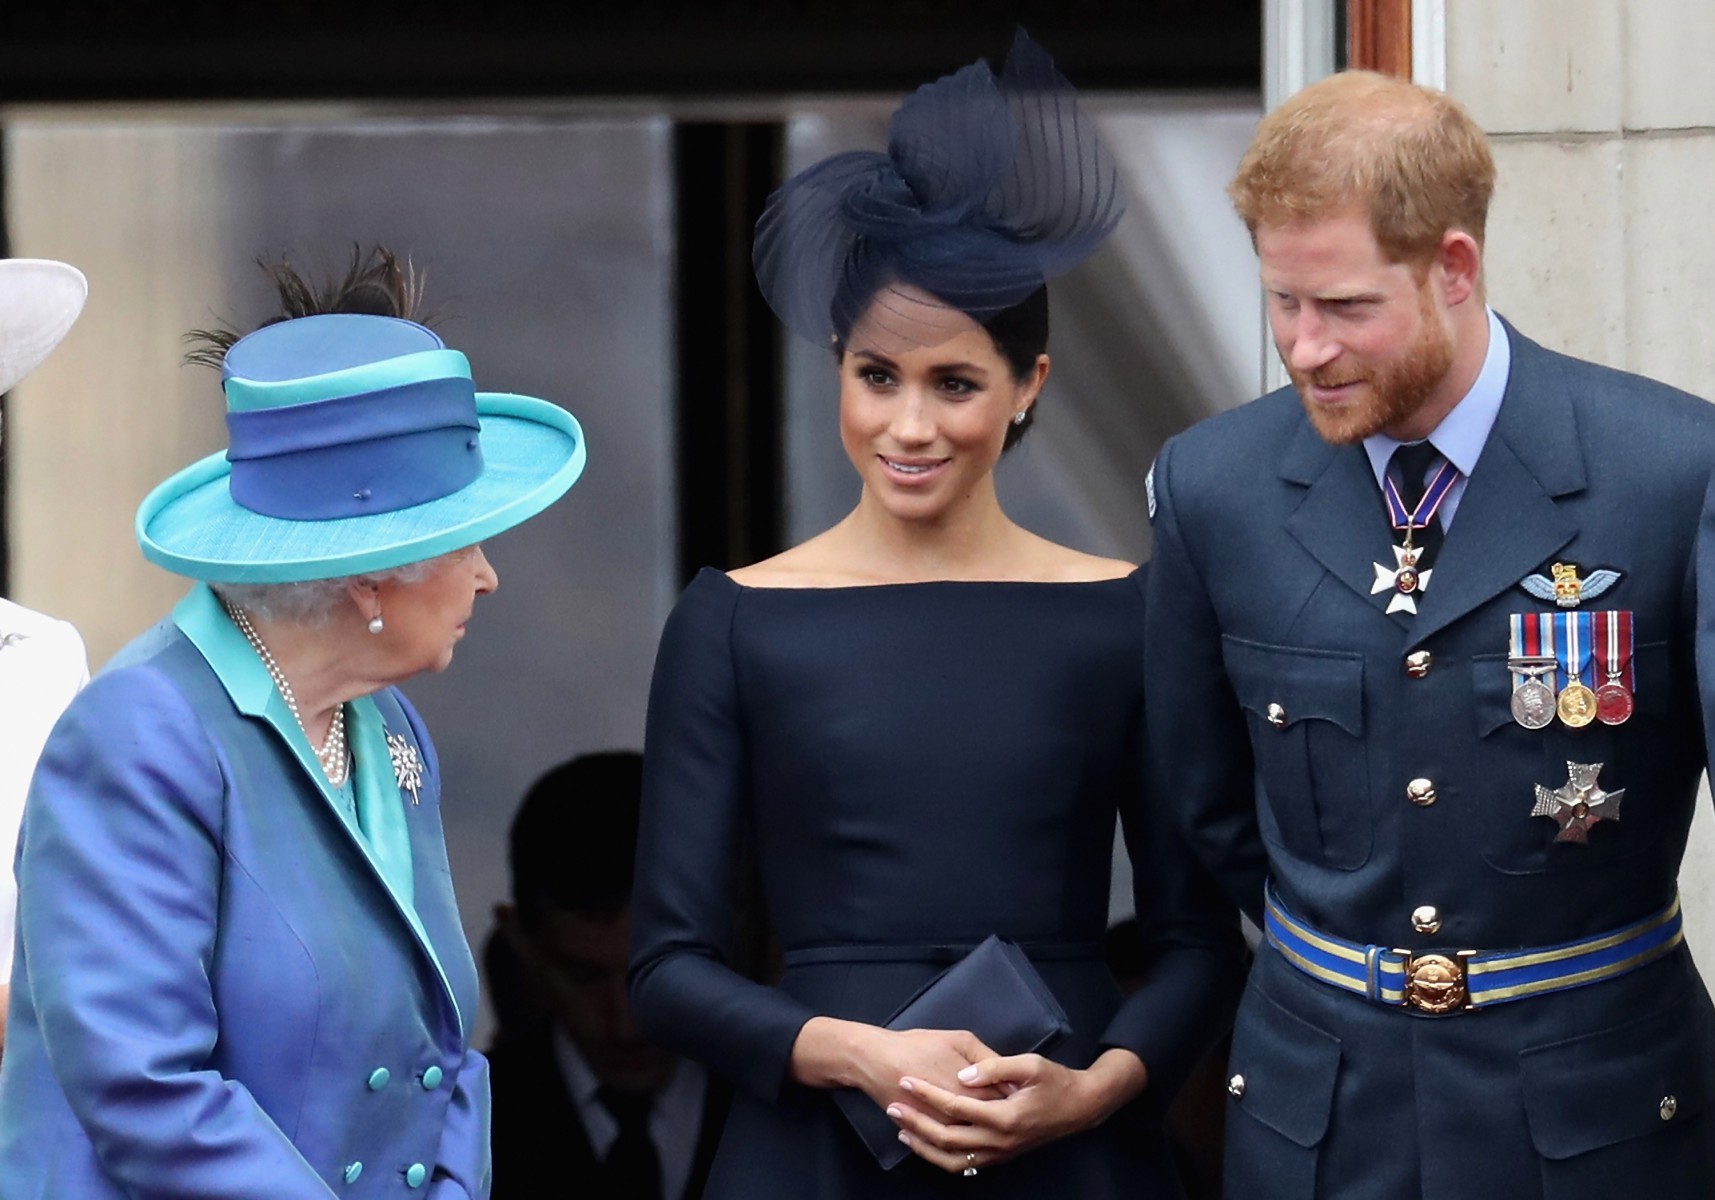 Meghan and Harry this week spoke to the Queen about their future roles